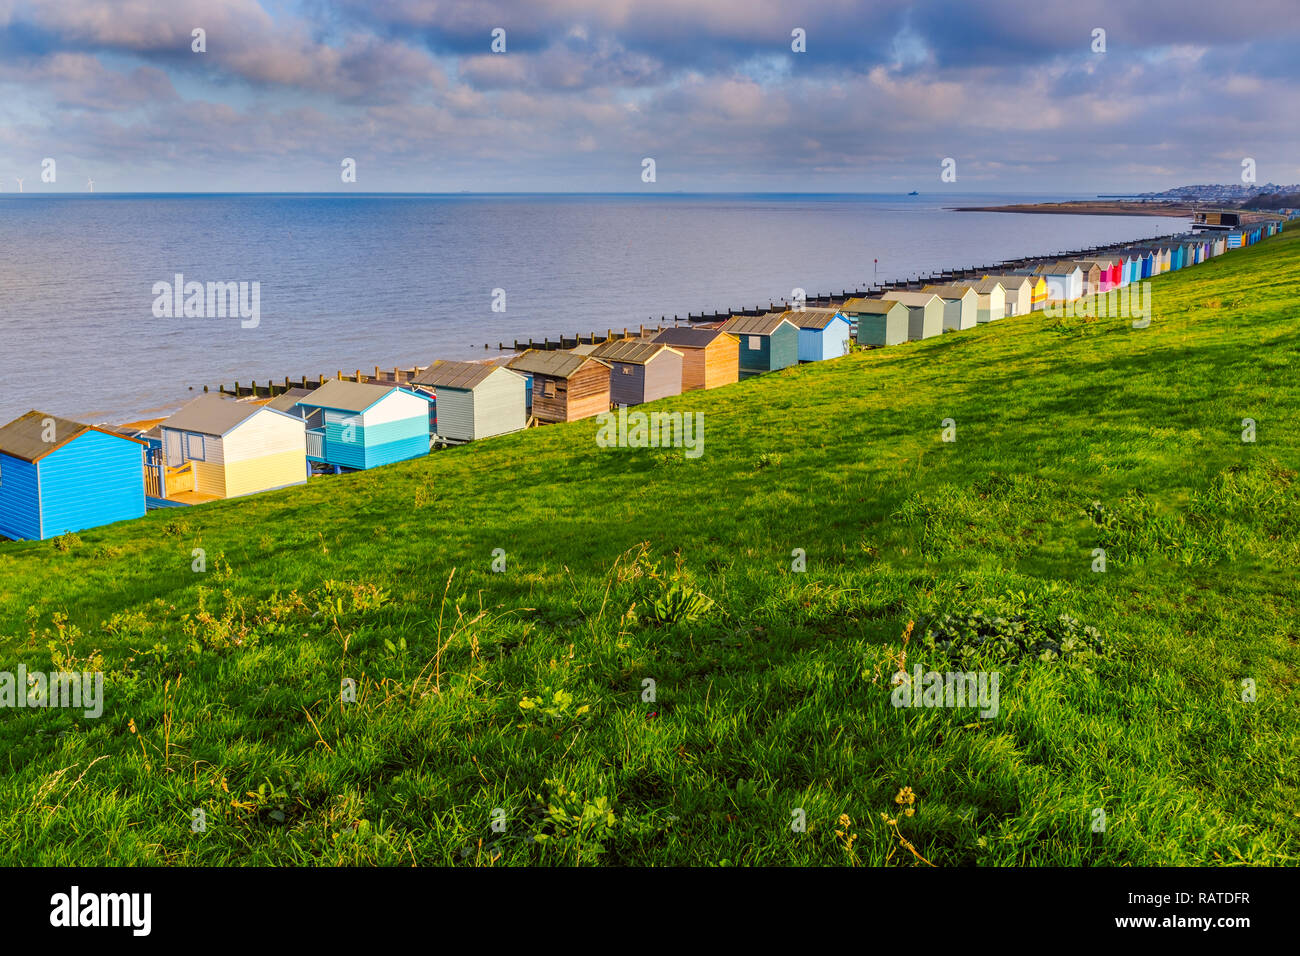 Row of beach huts along the coast in Tankerton, Whitstable, Kent. The green grass slopes are behind the huts and groynes, water breakers can be seen a Stock Photo